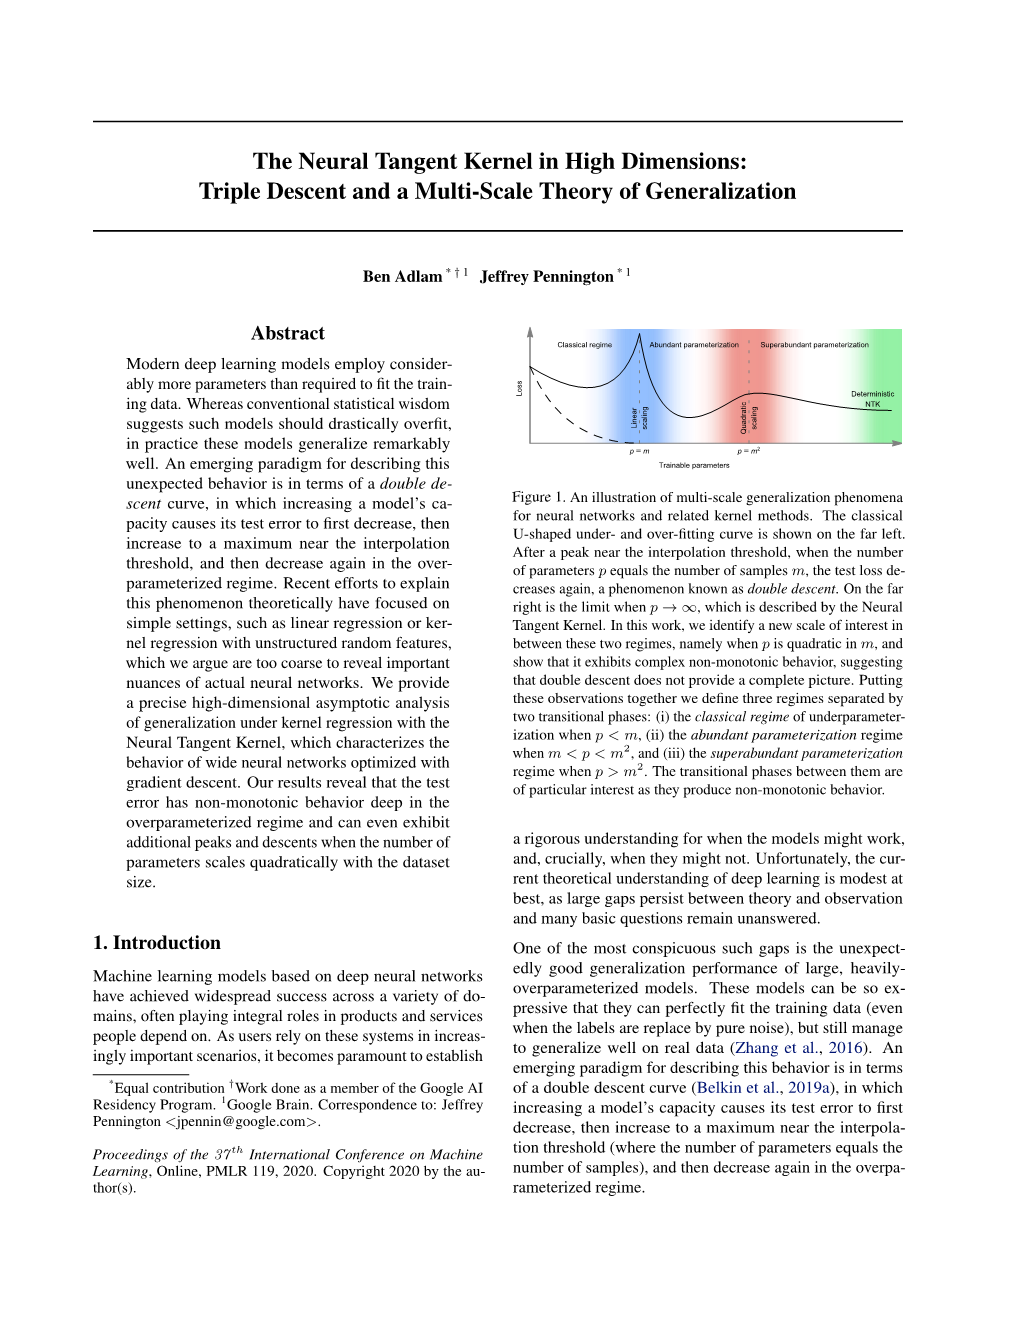 The Neural Tangent Kernel in High Dimensions: Triple Descent and a Multi-Scale Theory of Generalization